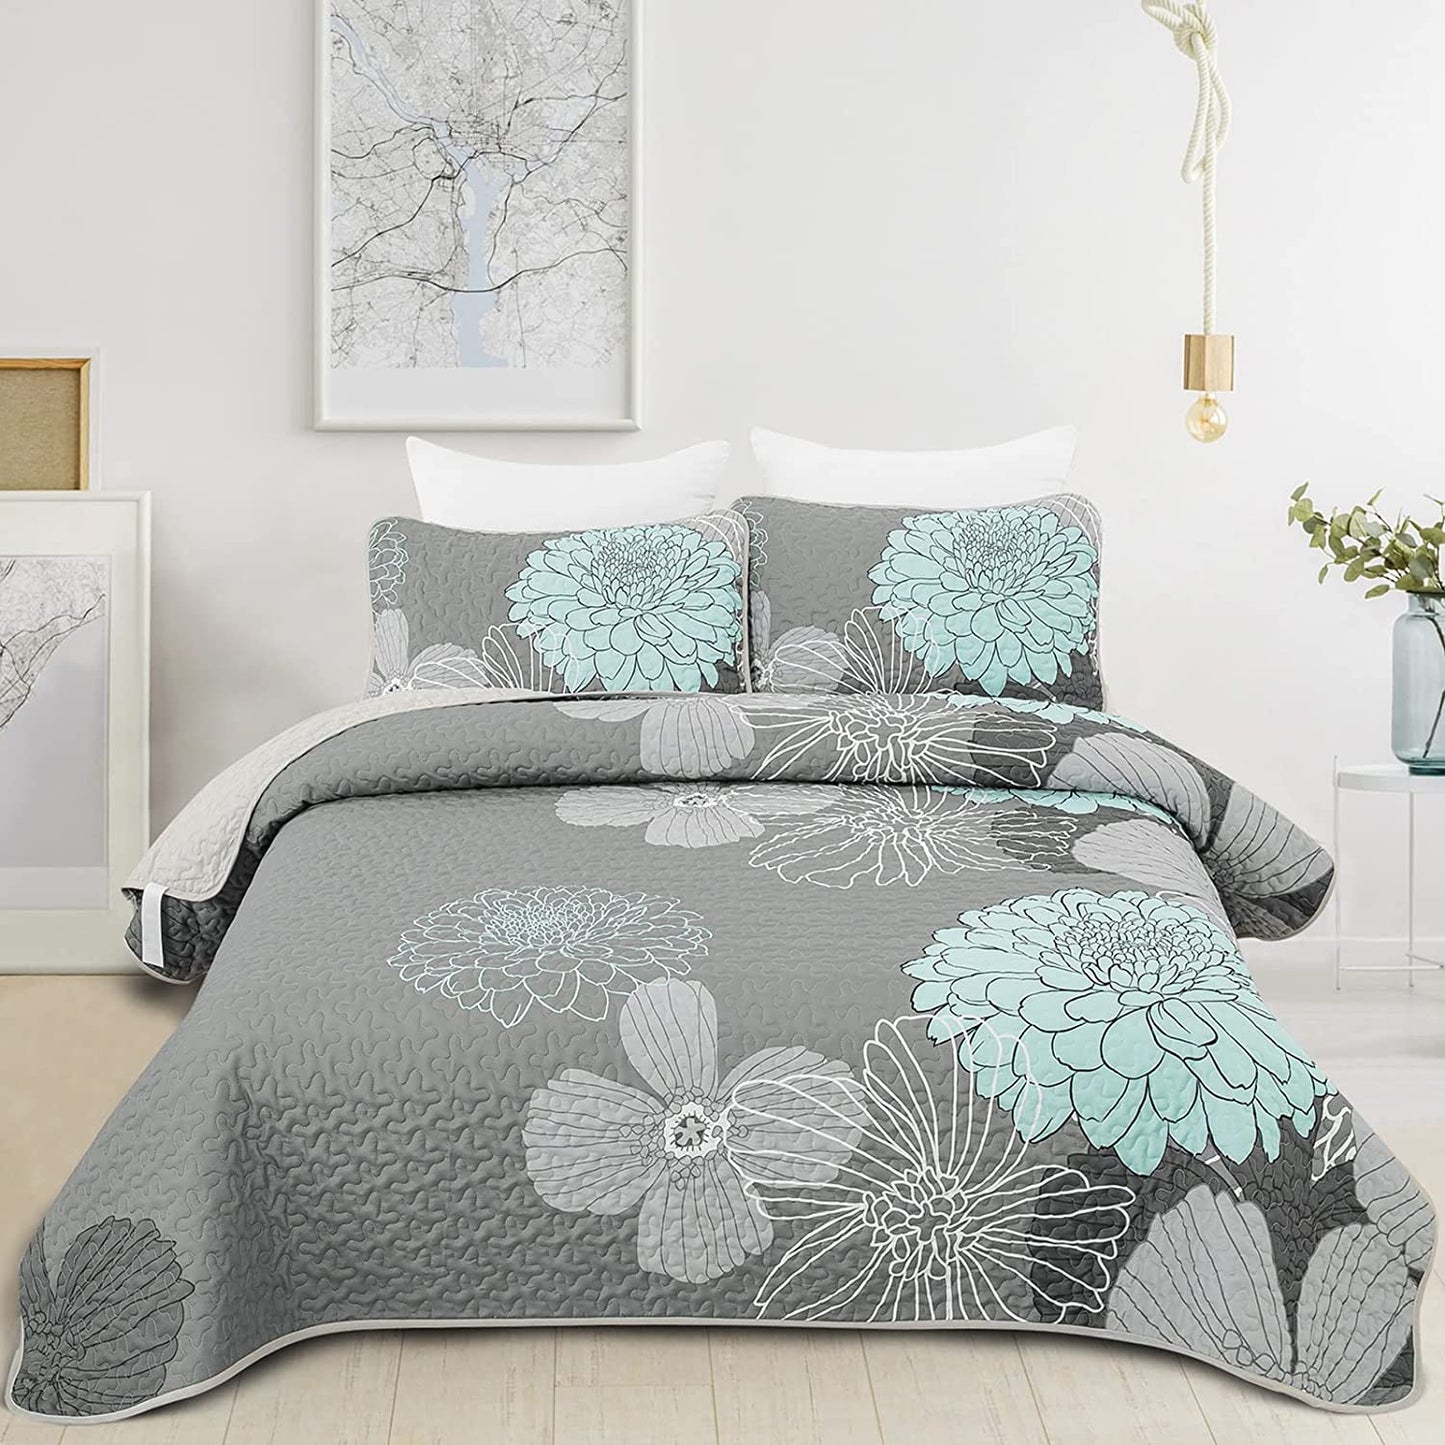 Green Floral Pattern Queen Size Quilt Set - 3 Pieces Quilt Coverlet Elegant Bohemian Bedspread with 2 Pillowcases Soft Lightweight Bedding Quilt Set for Adults